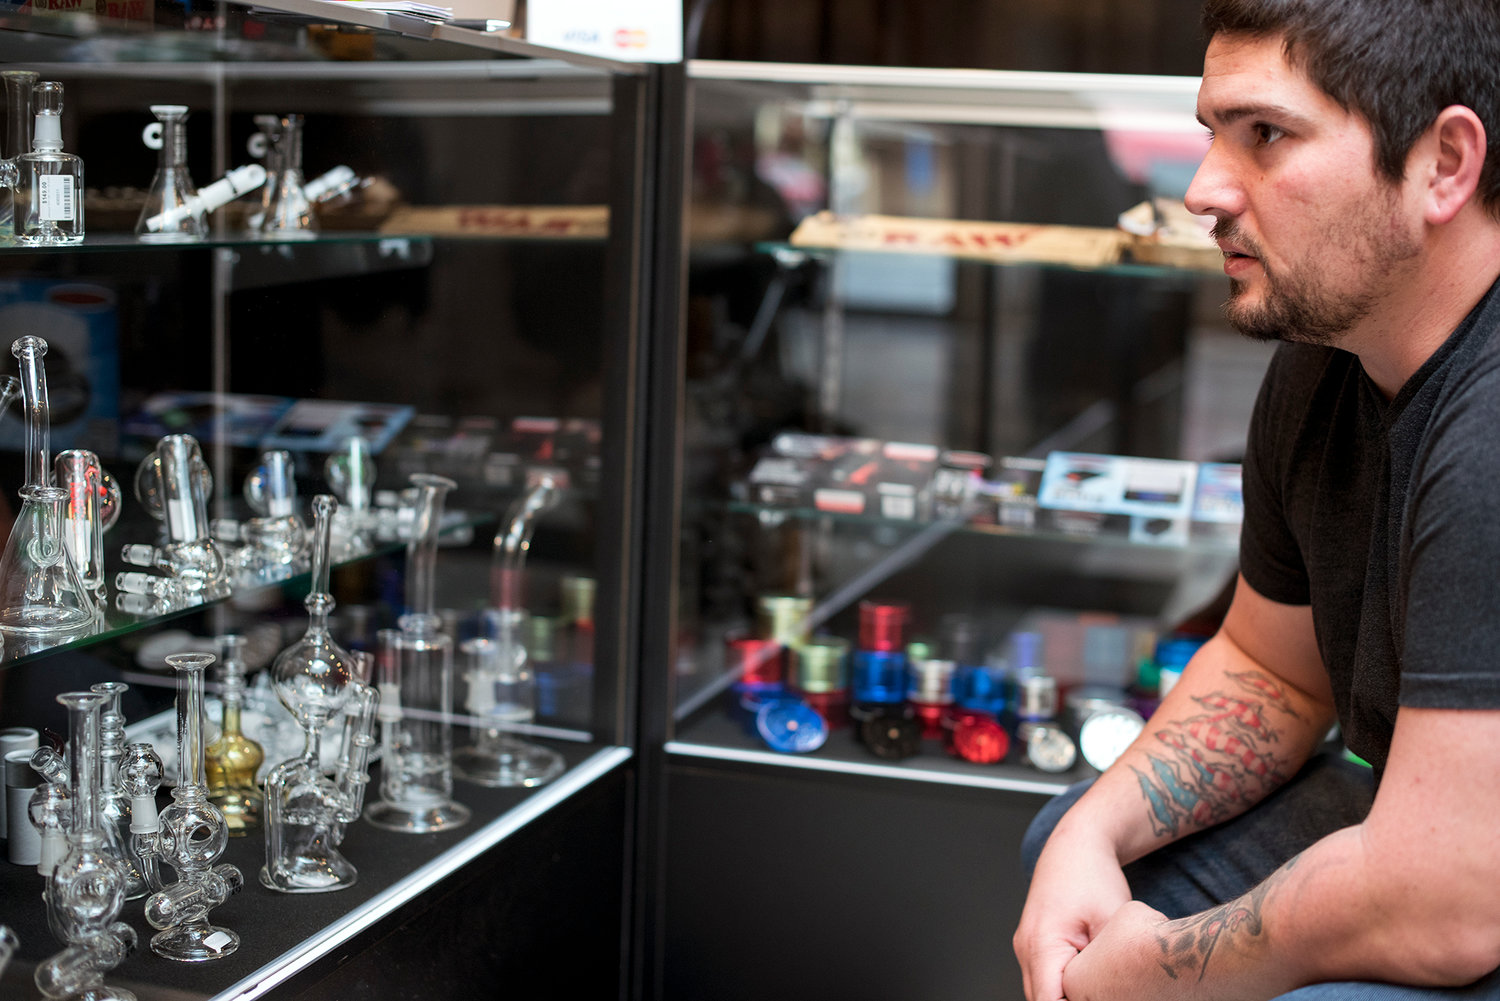 Peter Jacobsen, part-owner of The Jackal, looks at a glass case holding a plethora of a variety pipes on Tuesday, Nov. 24, at his shop in downtown Chehalis.